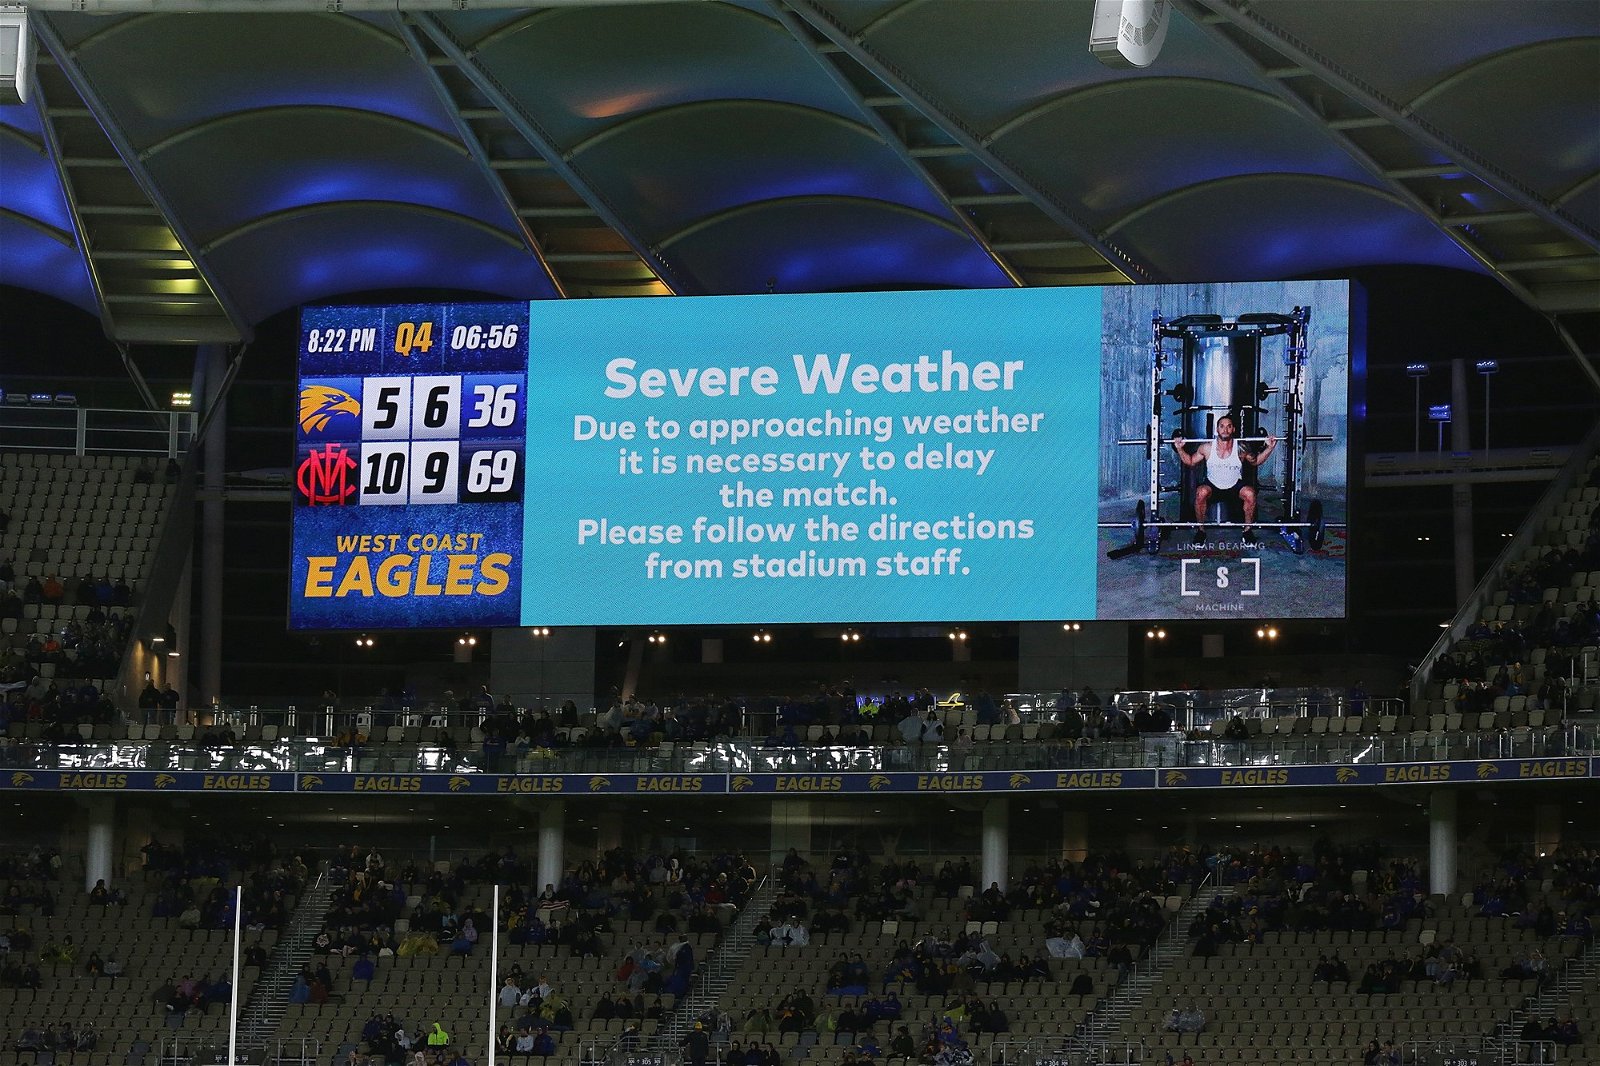 Screen at Perth Stadium flagging weather delay